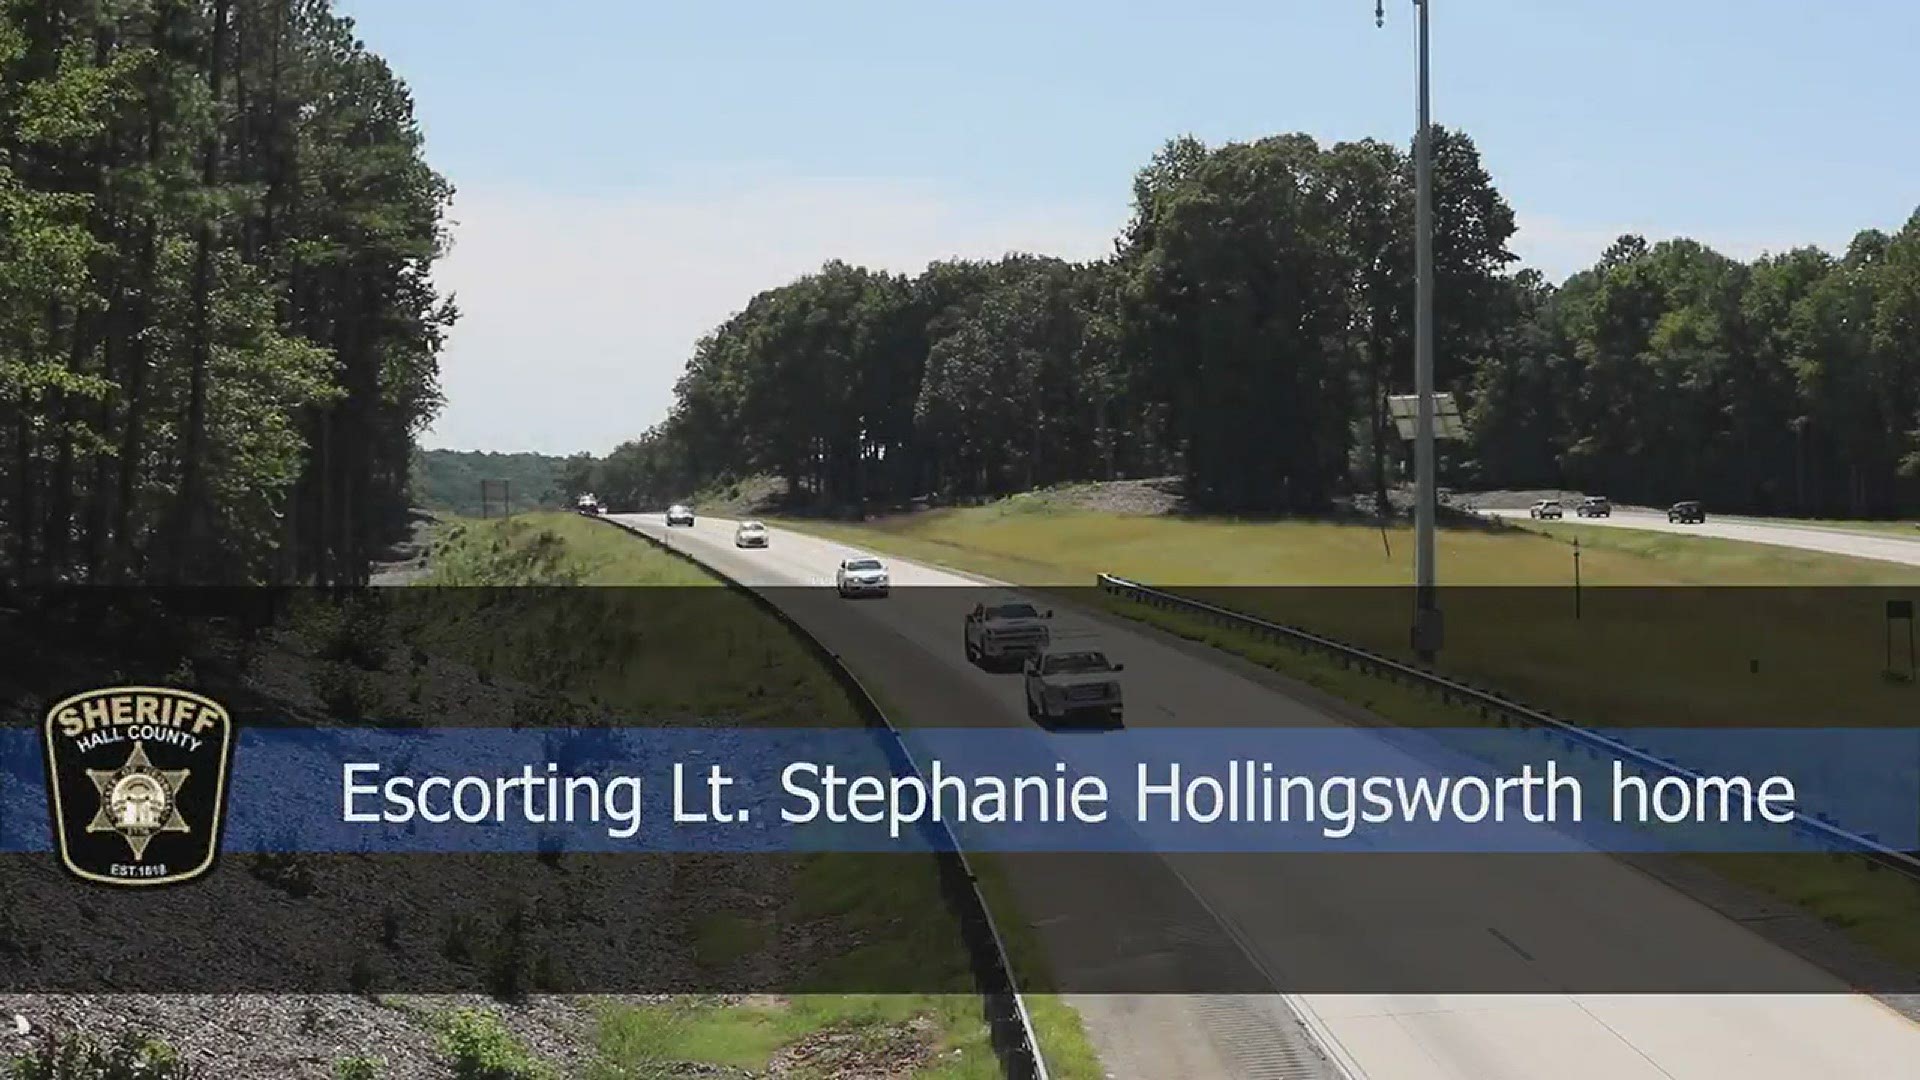 Lt. Stephanie Hollingsworth was killed in a traffic accident on Sunday evening, the sheriff's office announced on Facebook.